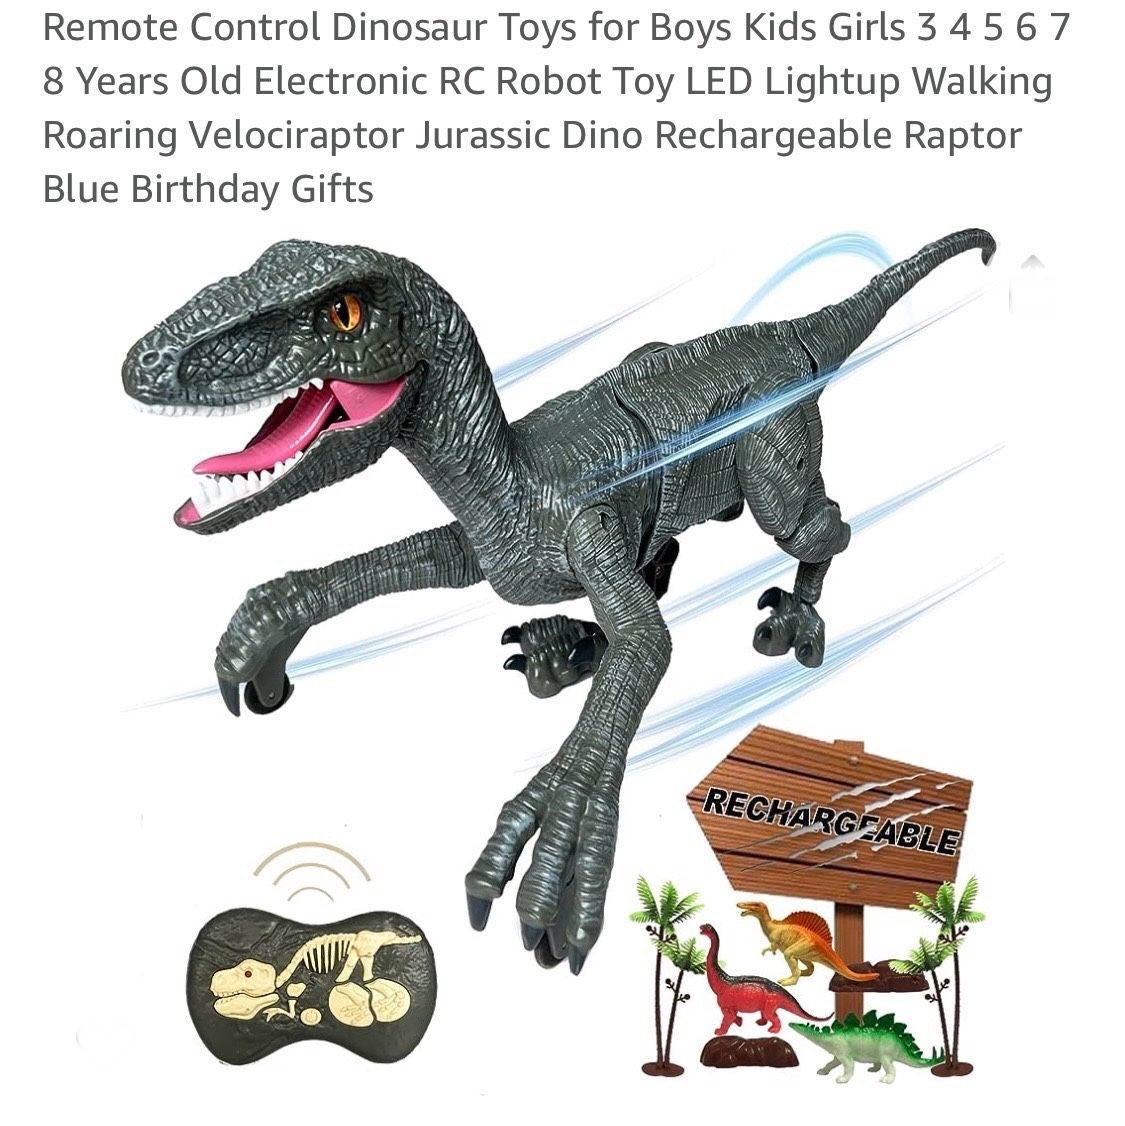 Remote Control Dinosaur Toys for Boys Kids Girls 3 4 5 6 7 8 Years Old Electronic RC Robot Toy LED Lightup Walking Roaring Velociraptor Jurassic Dino 